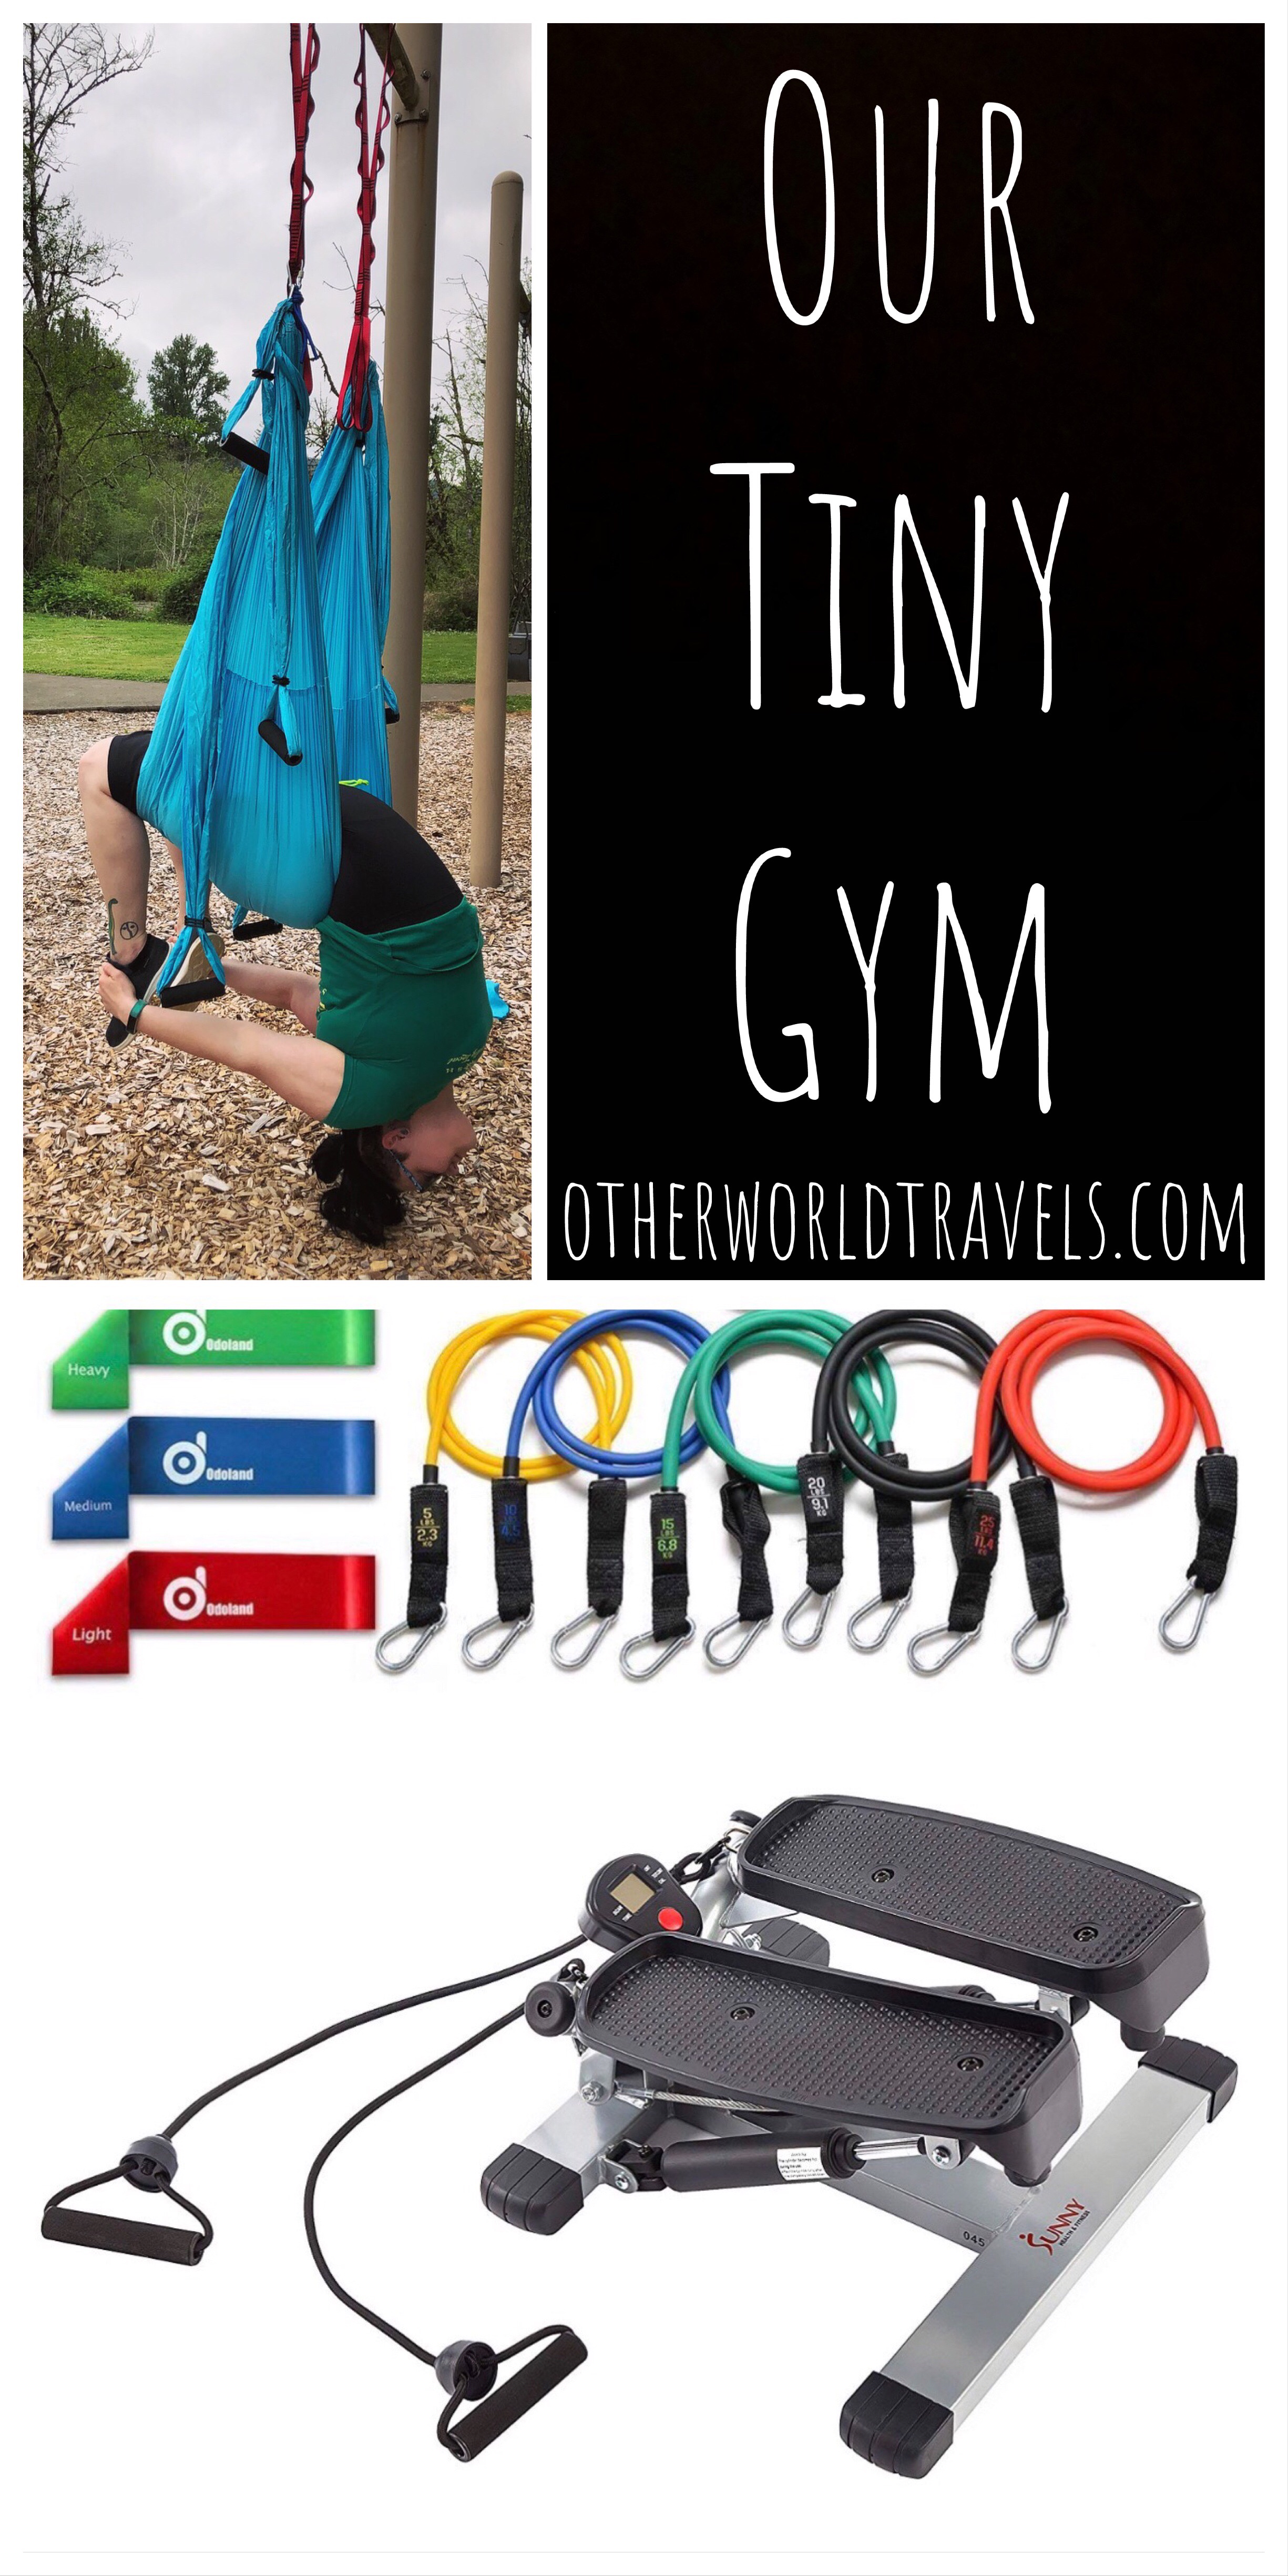 Our Tiny Gym — Otherworld Travels